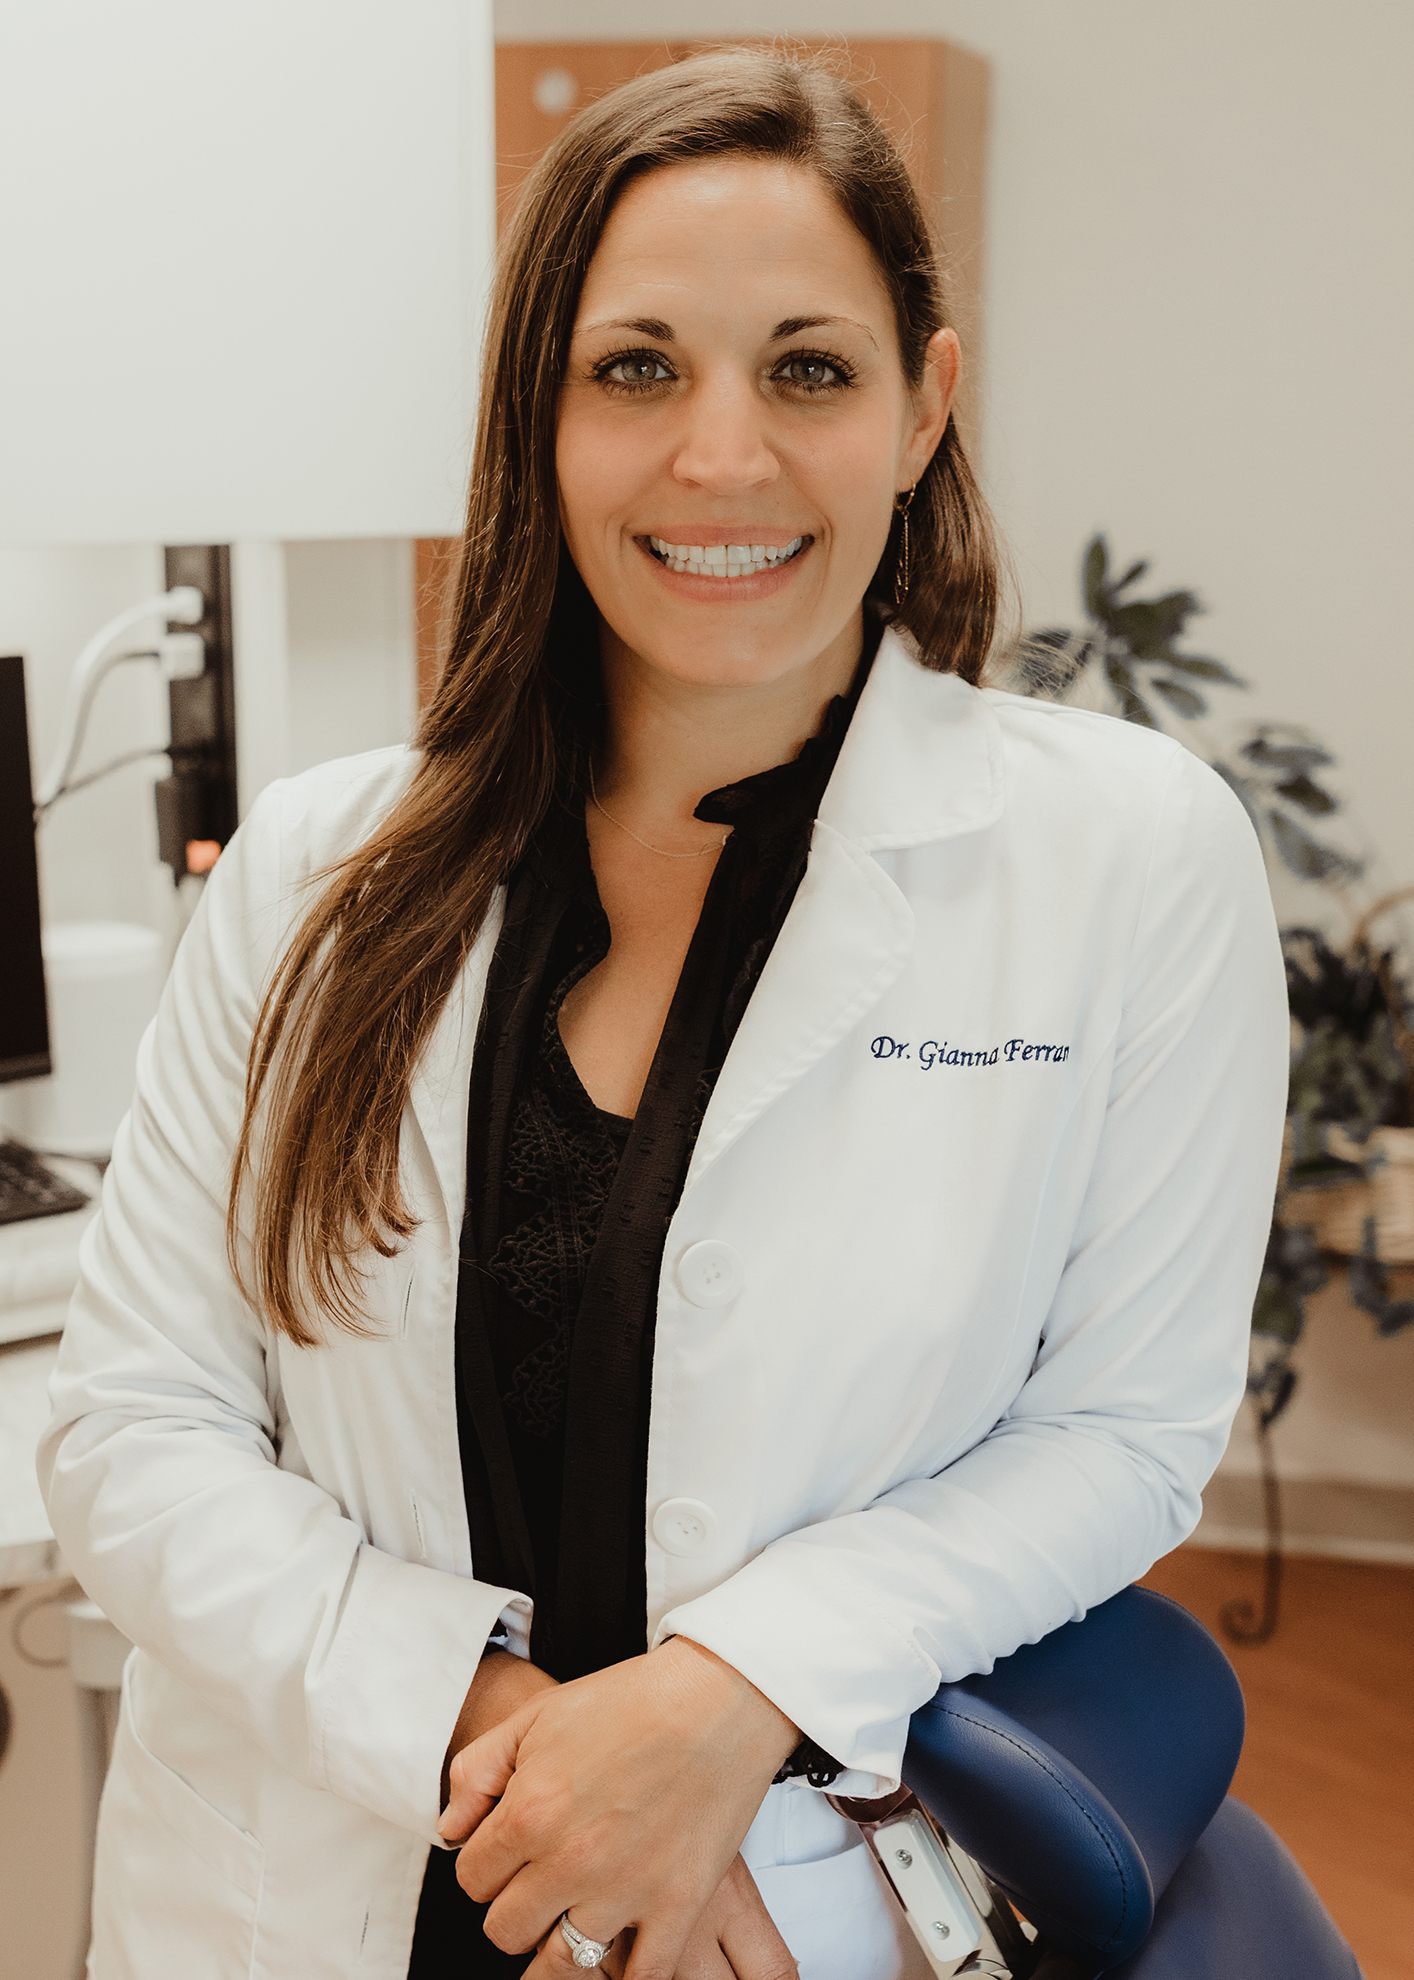 Dr. Gianna Ferranti, DDS - Somers Smiles NY